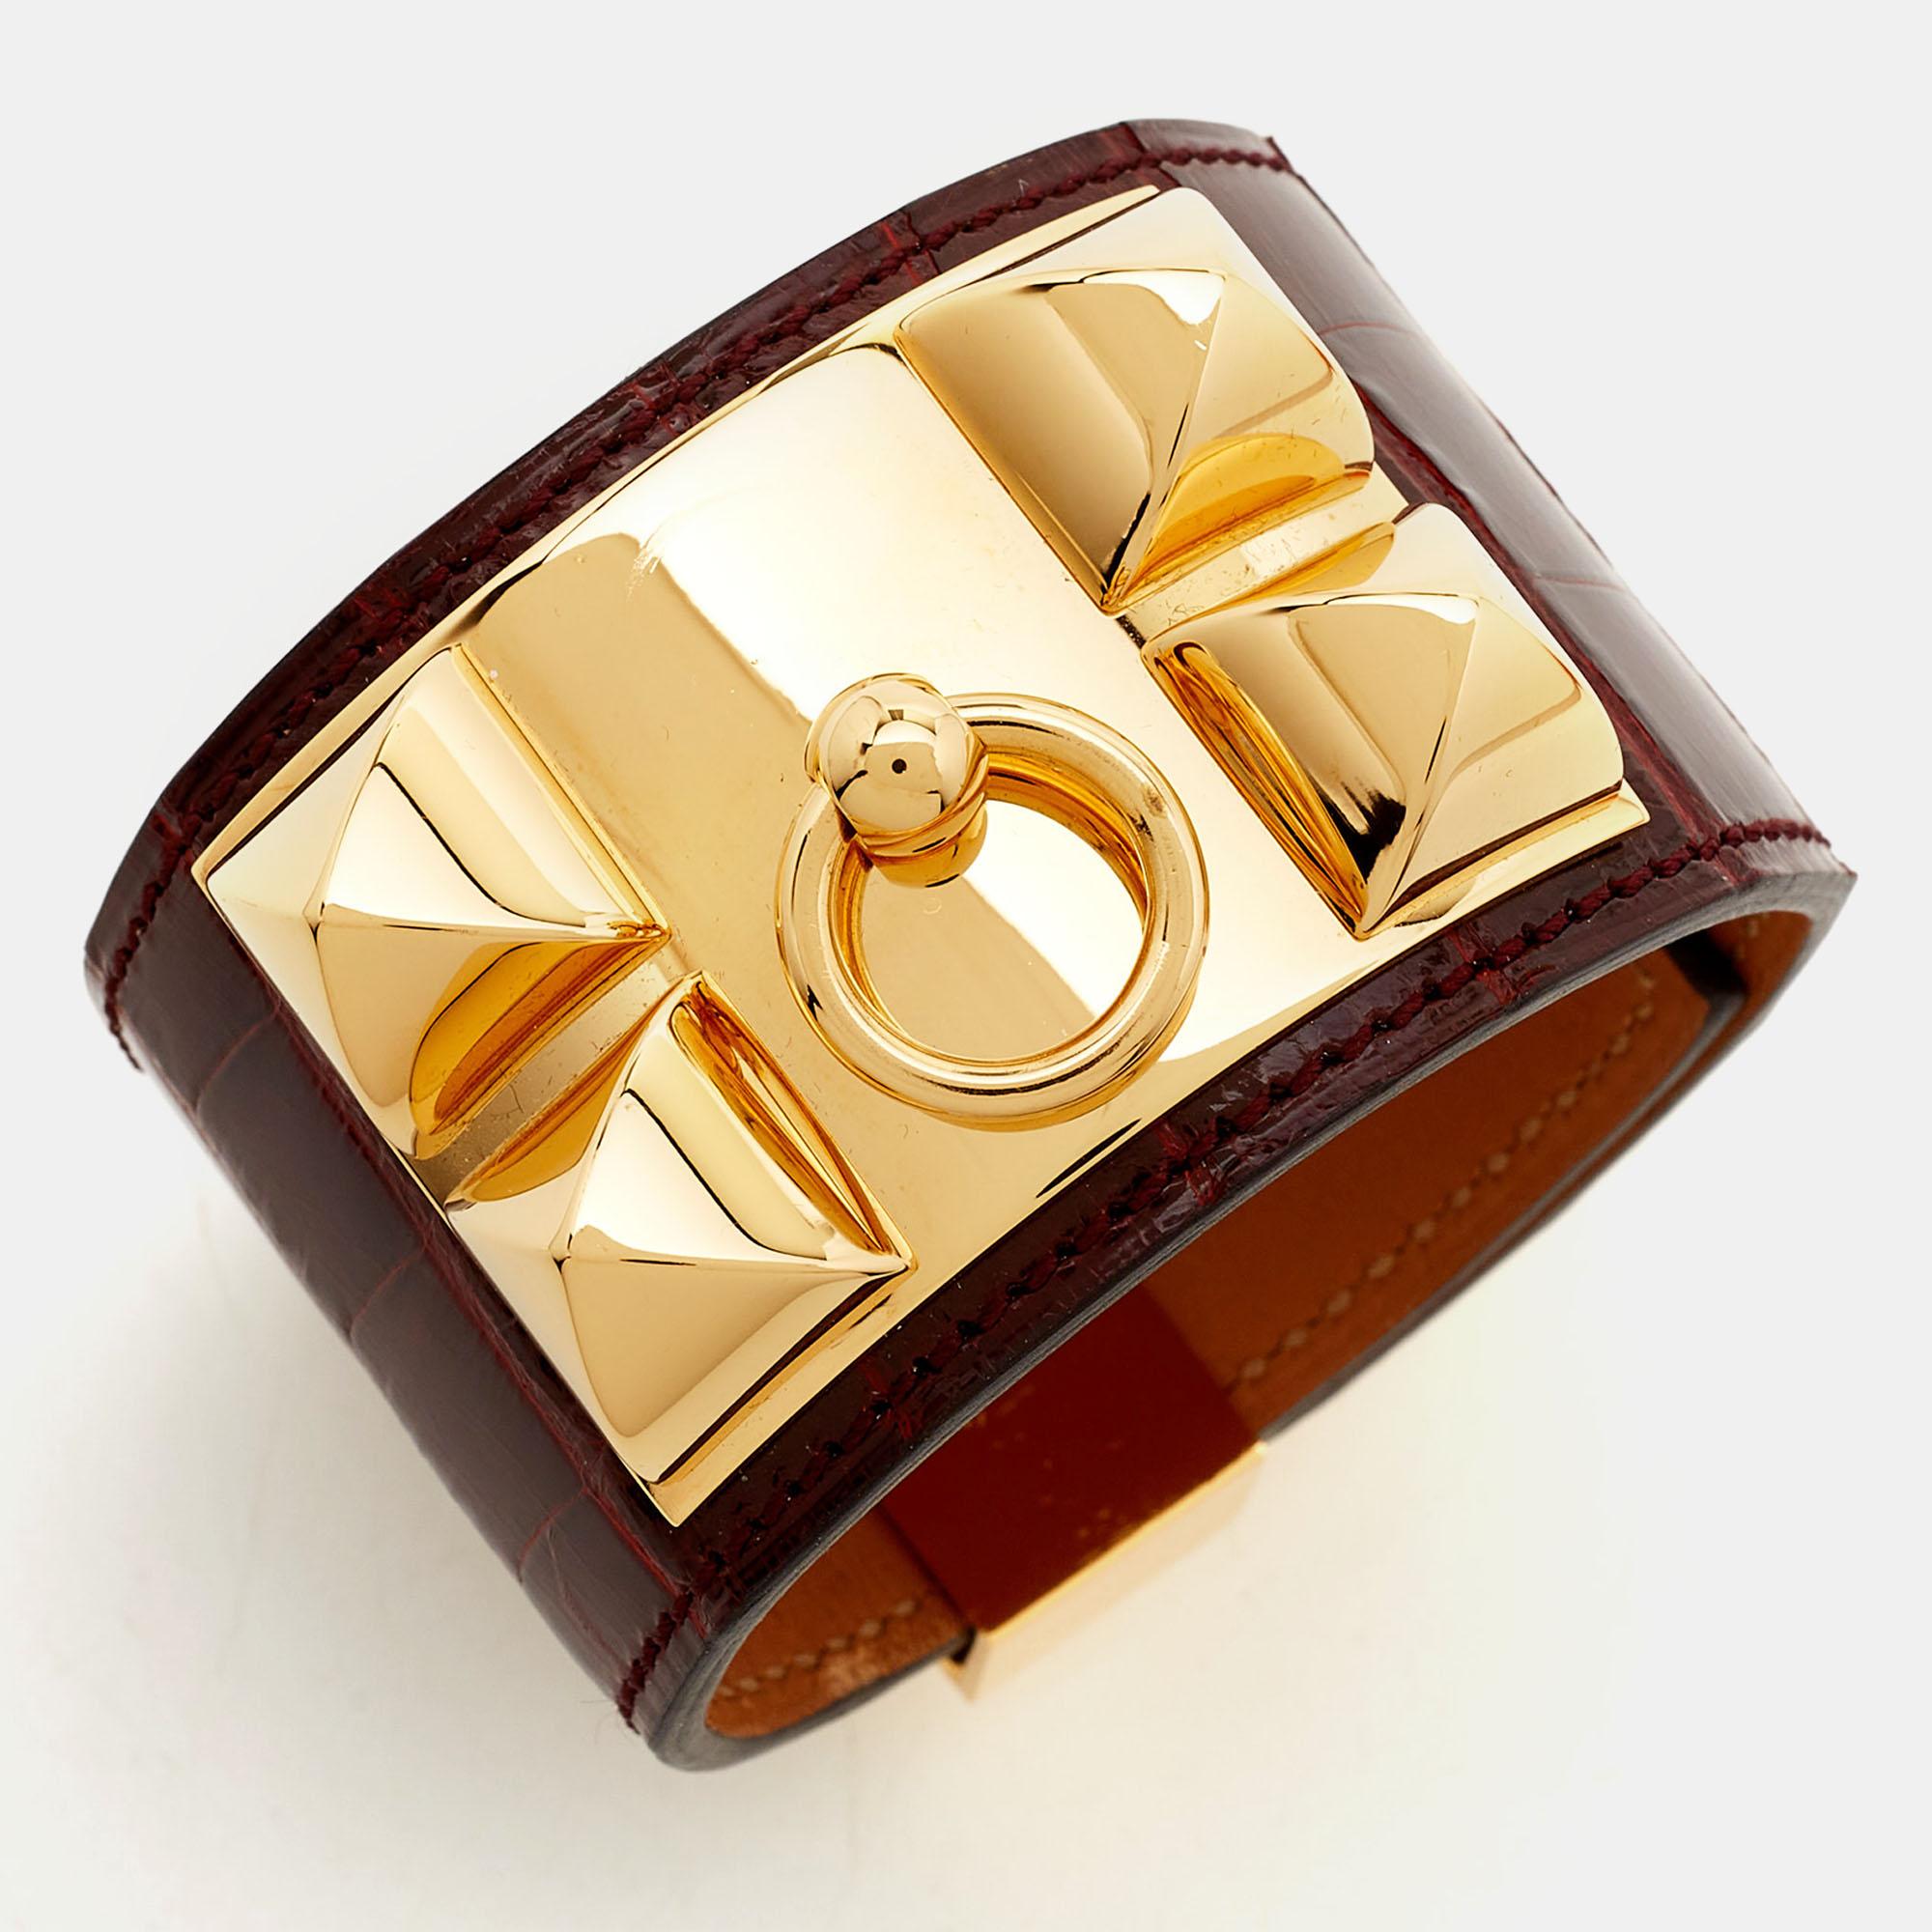 Add Hermes' magic to the way you accessorize with this bracelet. This alligator leather bracelet is styled with fine lines and gold-plated metal. Highlighted by signature details, it is sure to add luxury charm to your ensemble.

Includes
Original